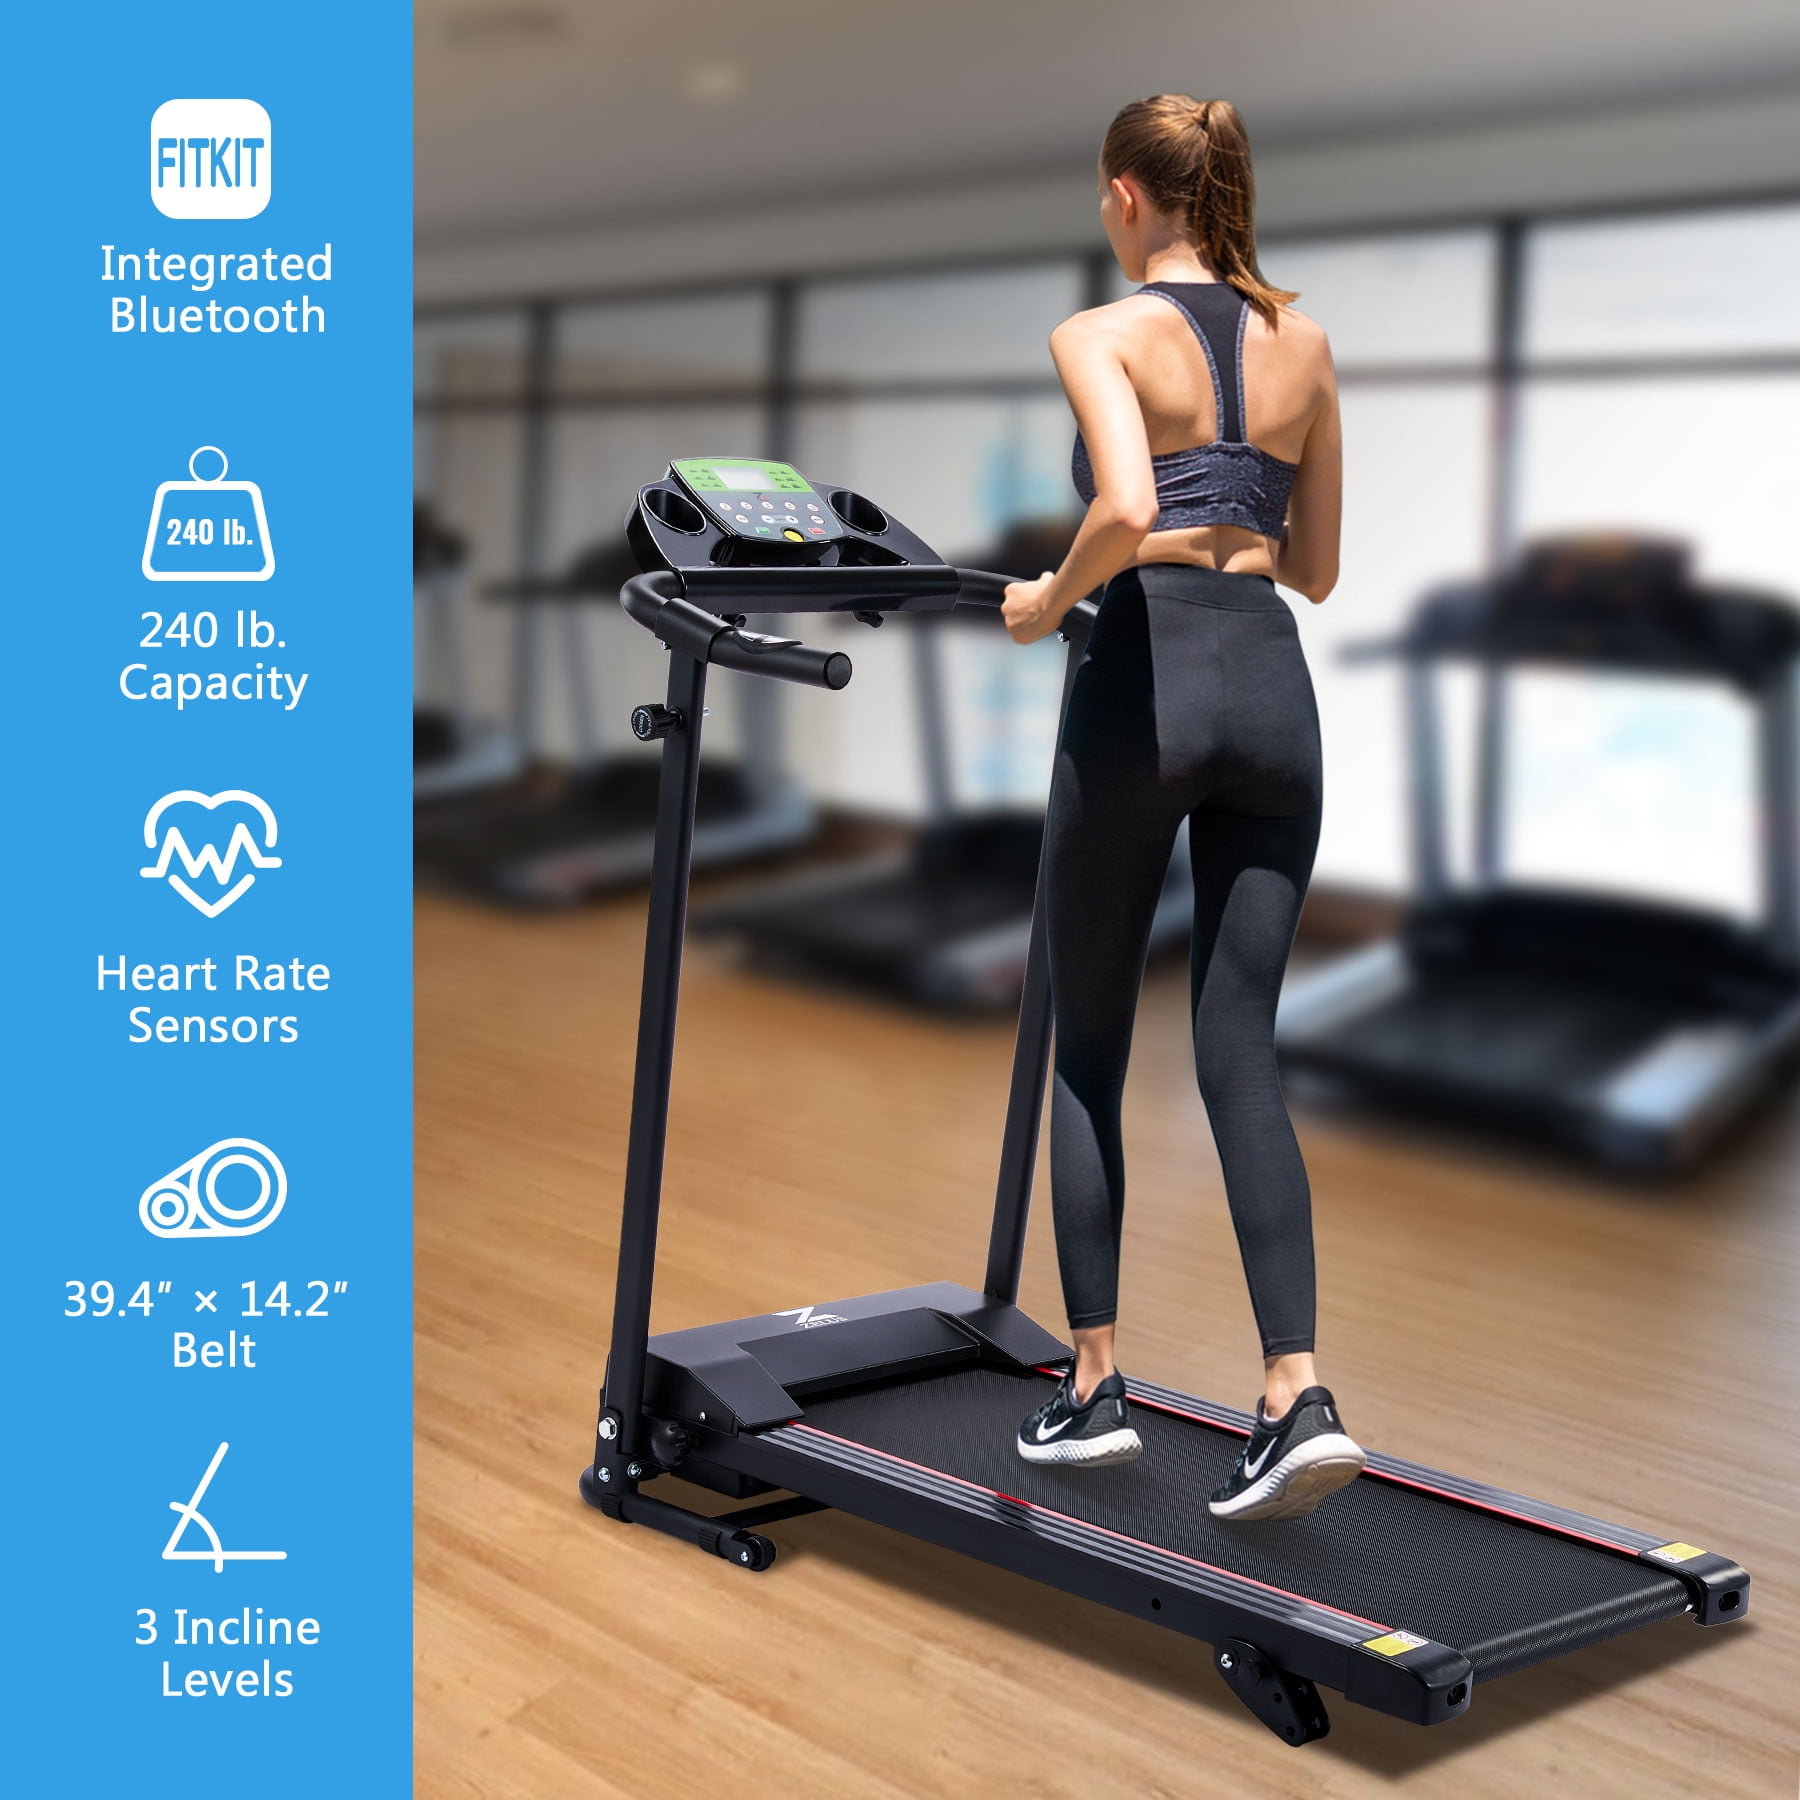 NEW 750w Motorized Electric Treadmill Running Machine height adjustable foldable 